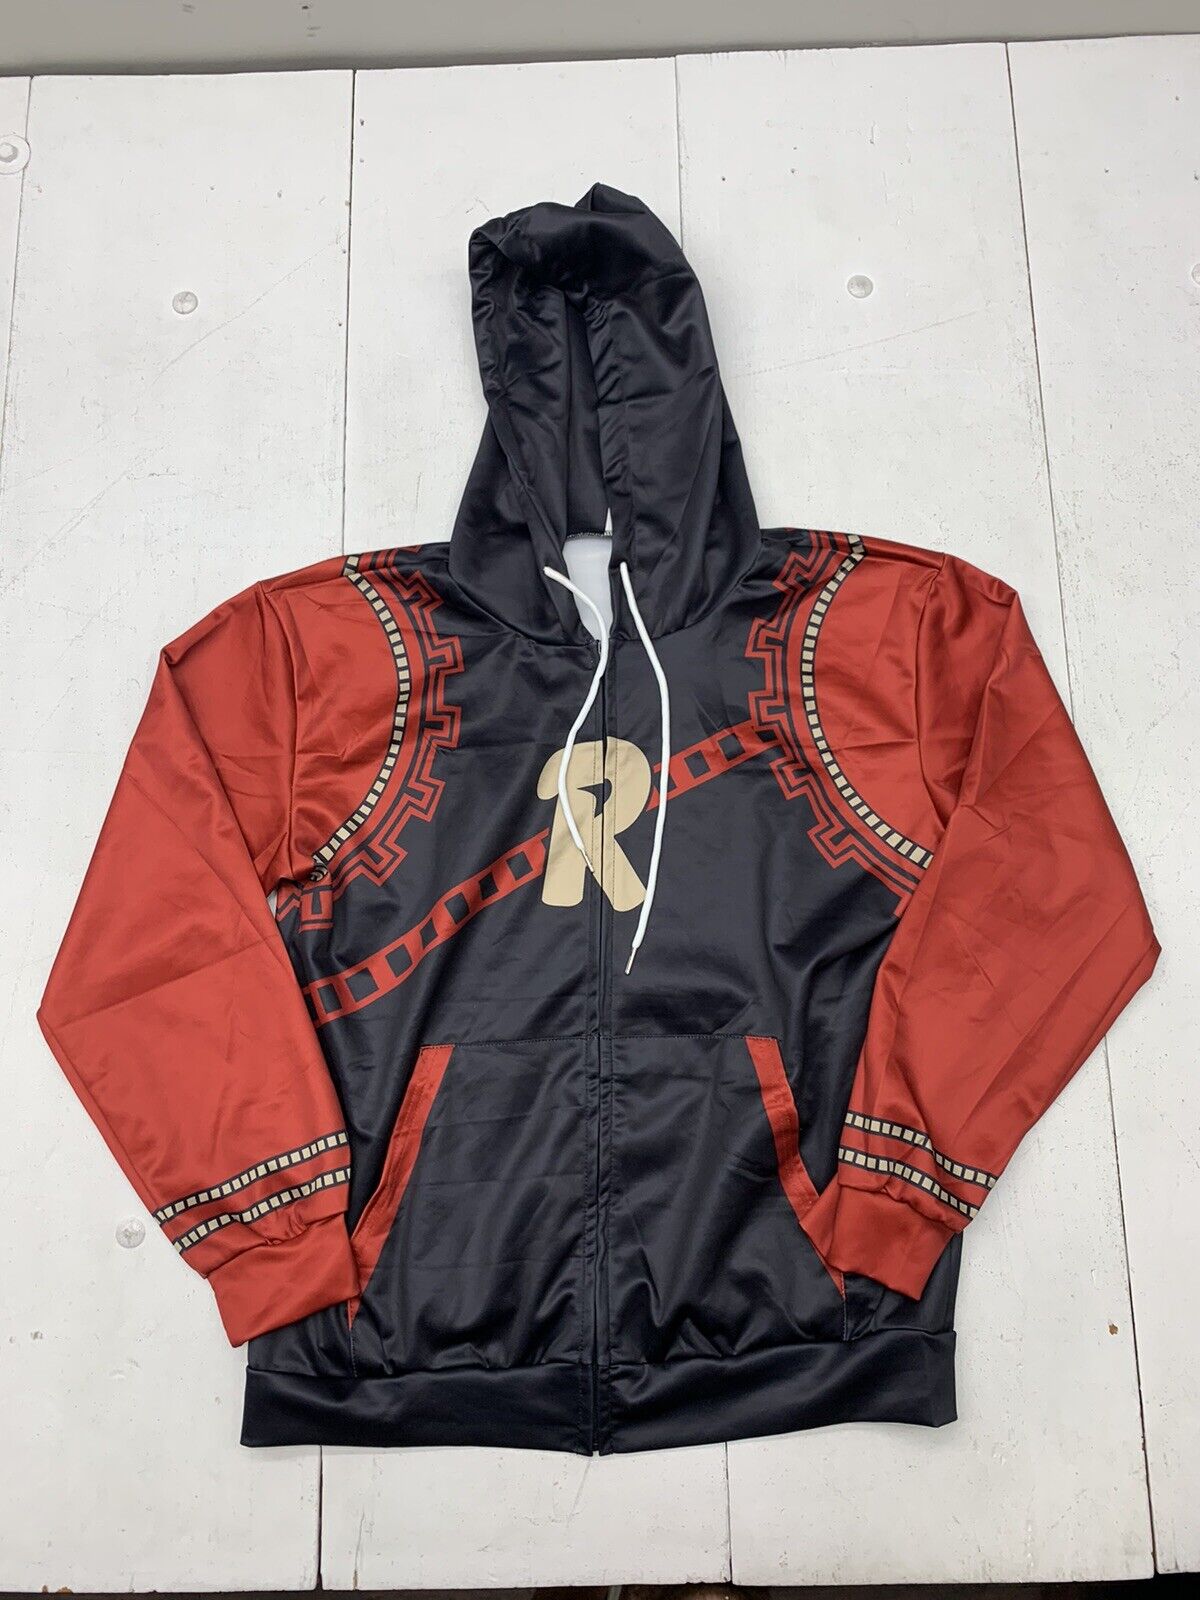 Mens Red Grey Graphic Print Fullzip Jacket Size Large